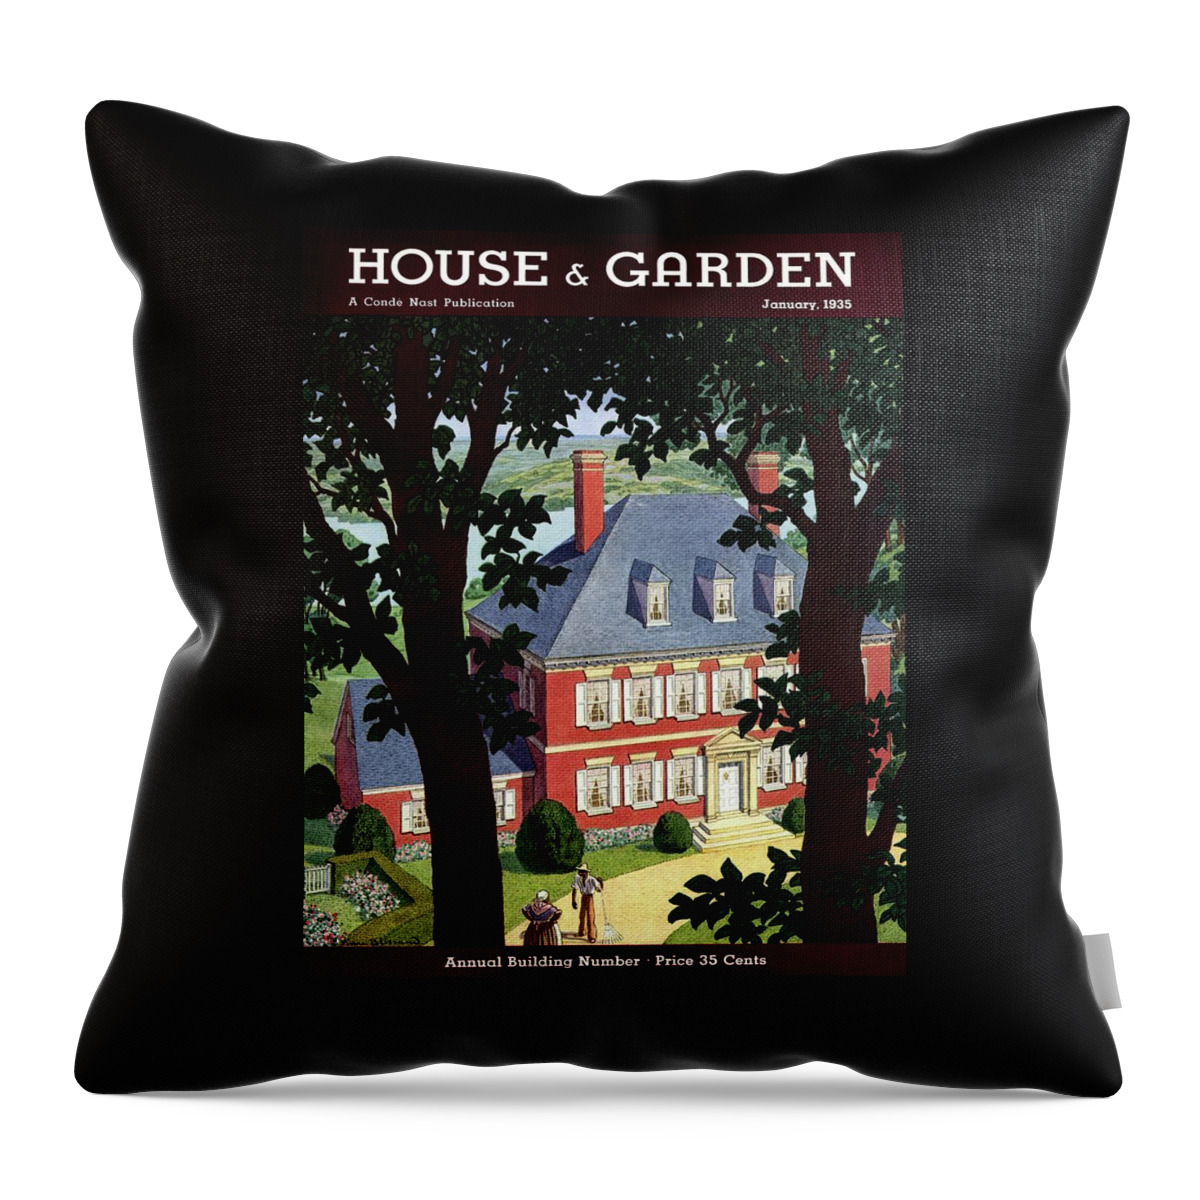 A Colonial Manor House Throw Pillow